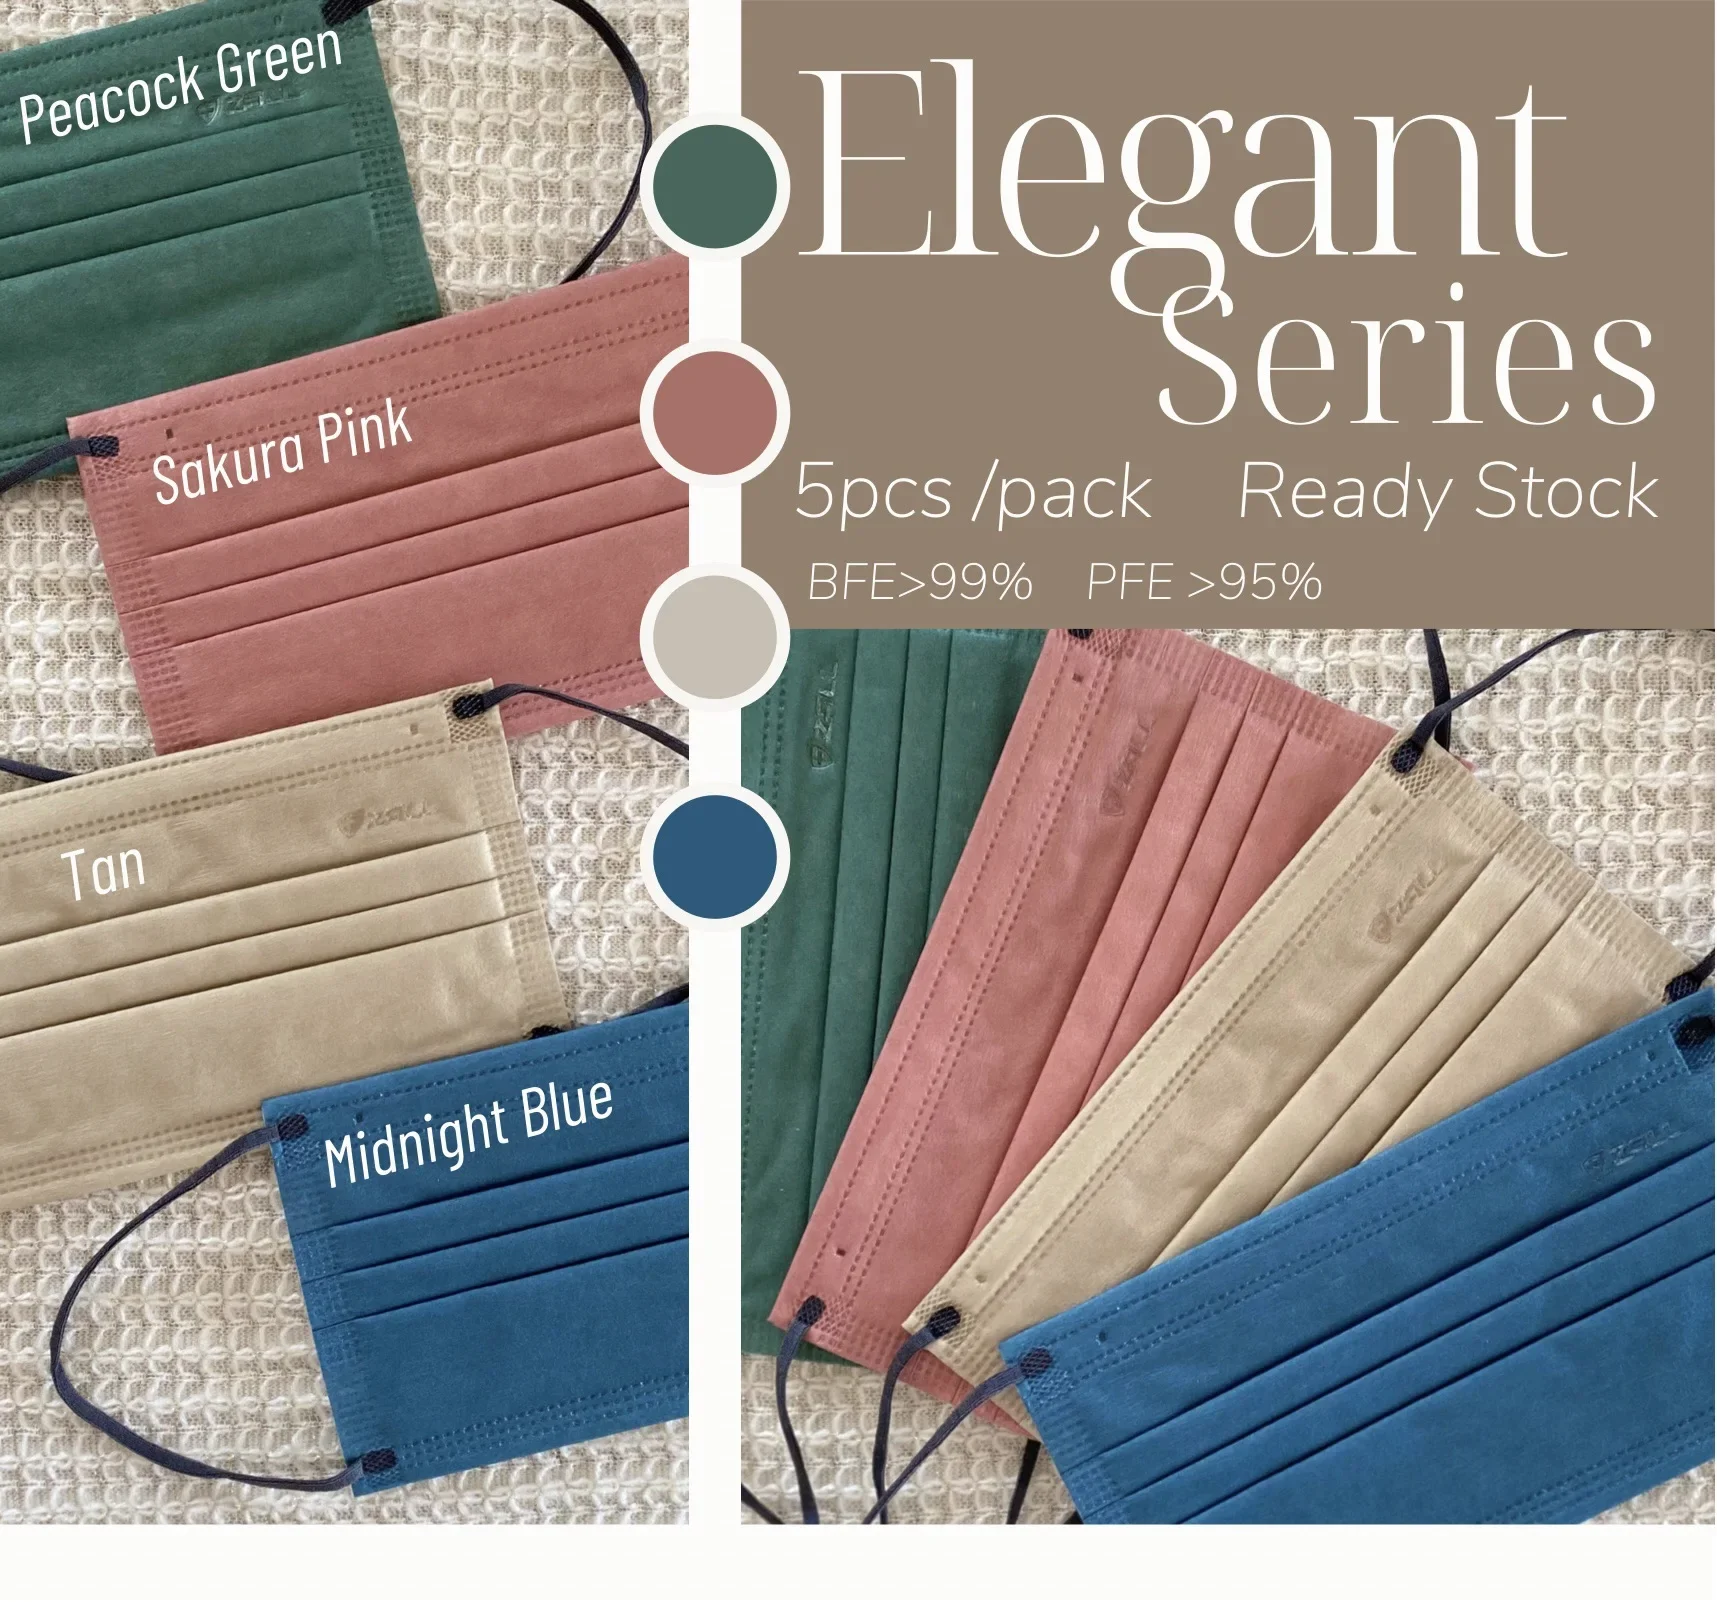 ELEGANT SERIES New Color! Best Quality 3 ply Face Mask BFE>99% PFE>95% 5PCS/PACK